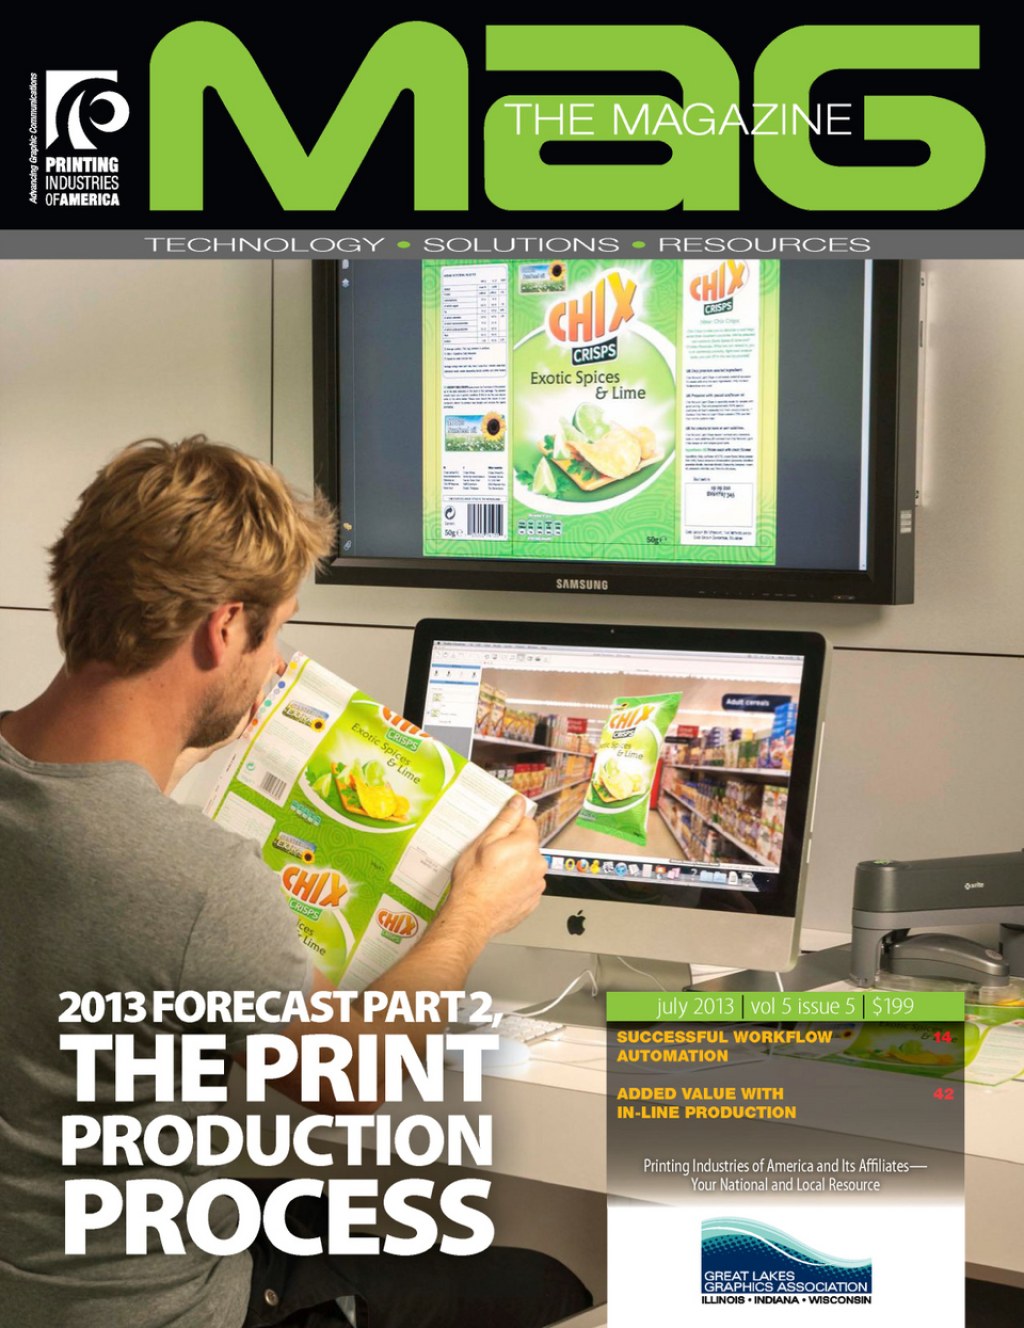 printing industries of america the magazine - Printing Industries of America The Magazine Forecast Part : The